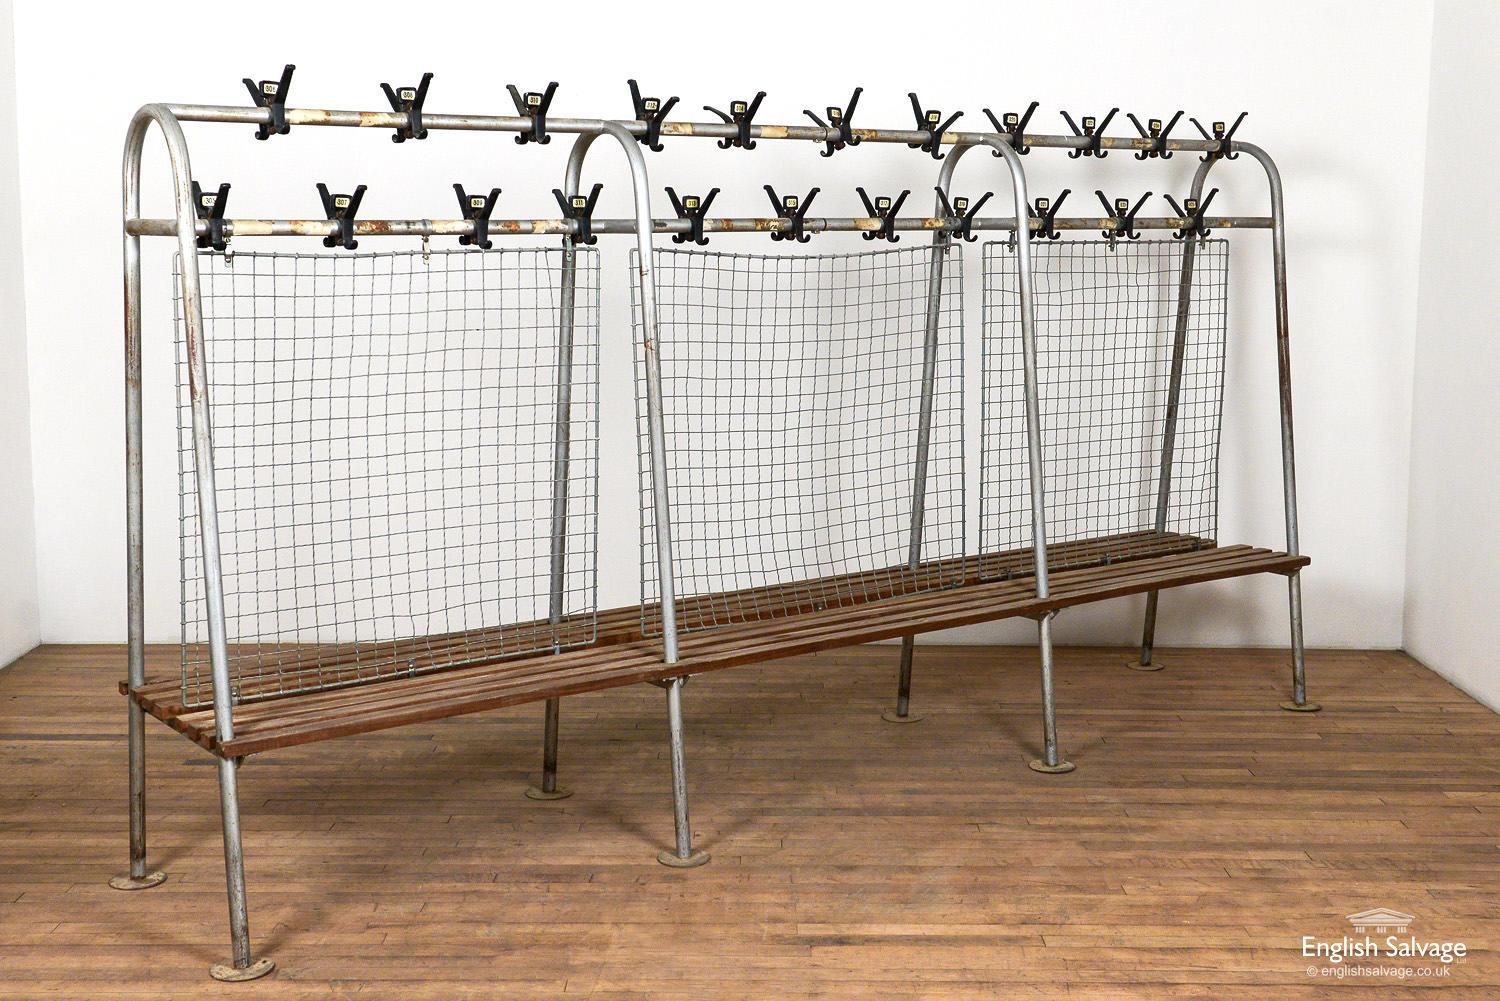 Salvaged midcentury changing room benches in tubular steel with slatted wood seats. Heavy duty wire mesh dividers and early plastic numbered coat hooks. The benches have fixing discs to the bottom each of the eight legs with fixing holes present.